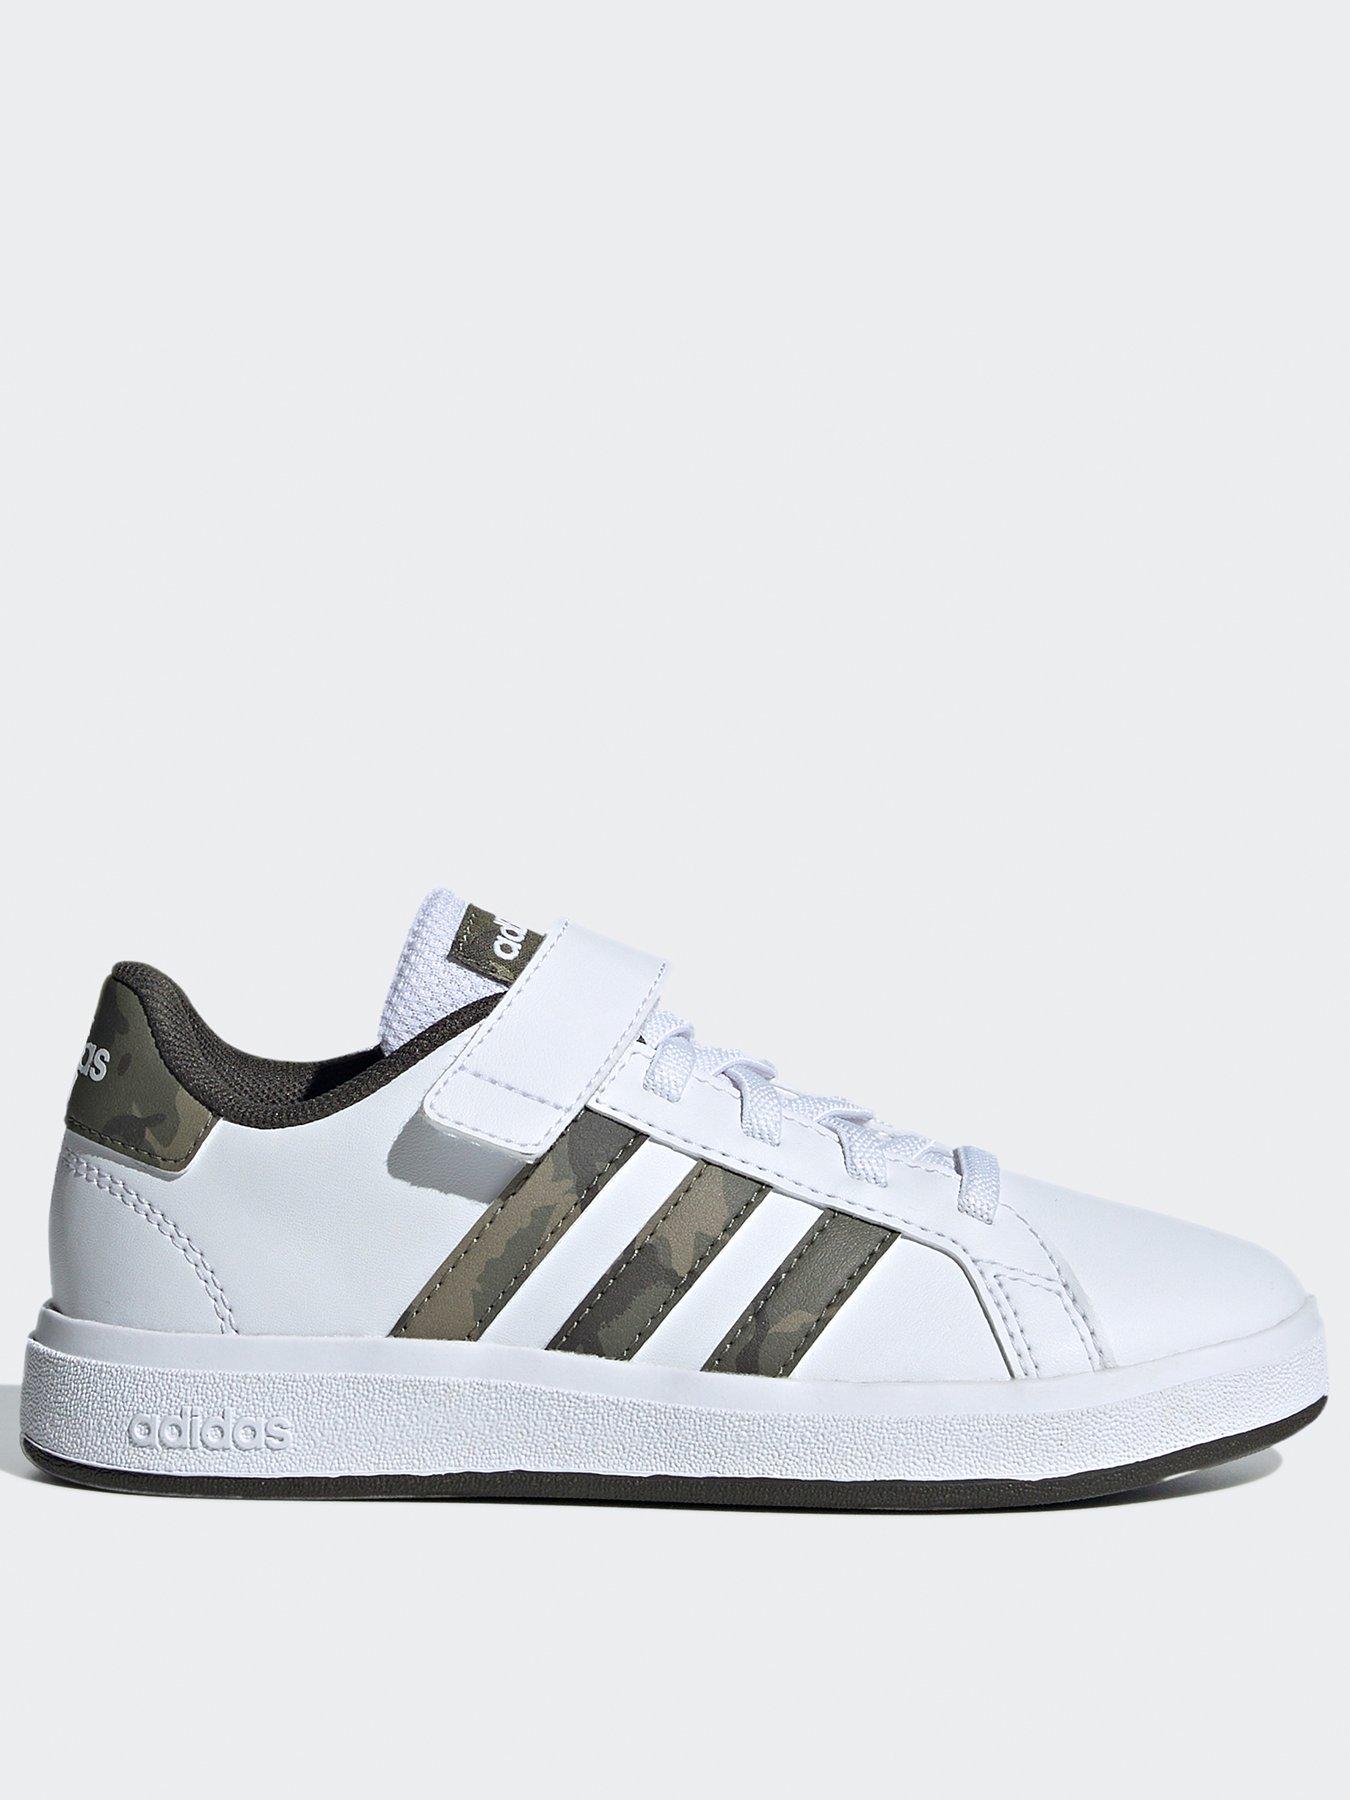 adidas Sportswear Kids Grand Court 2.0 Trainers - White, White, Size 12 Younger